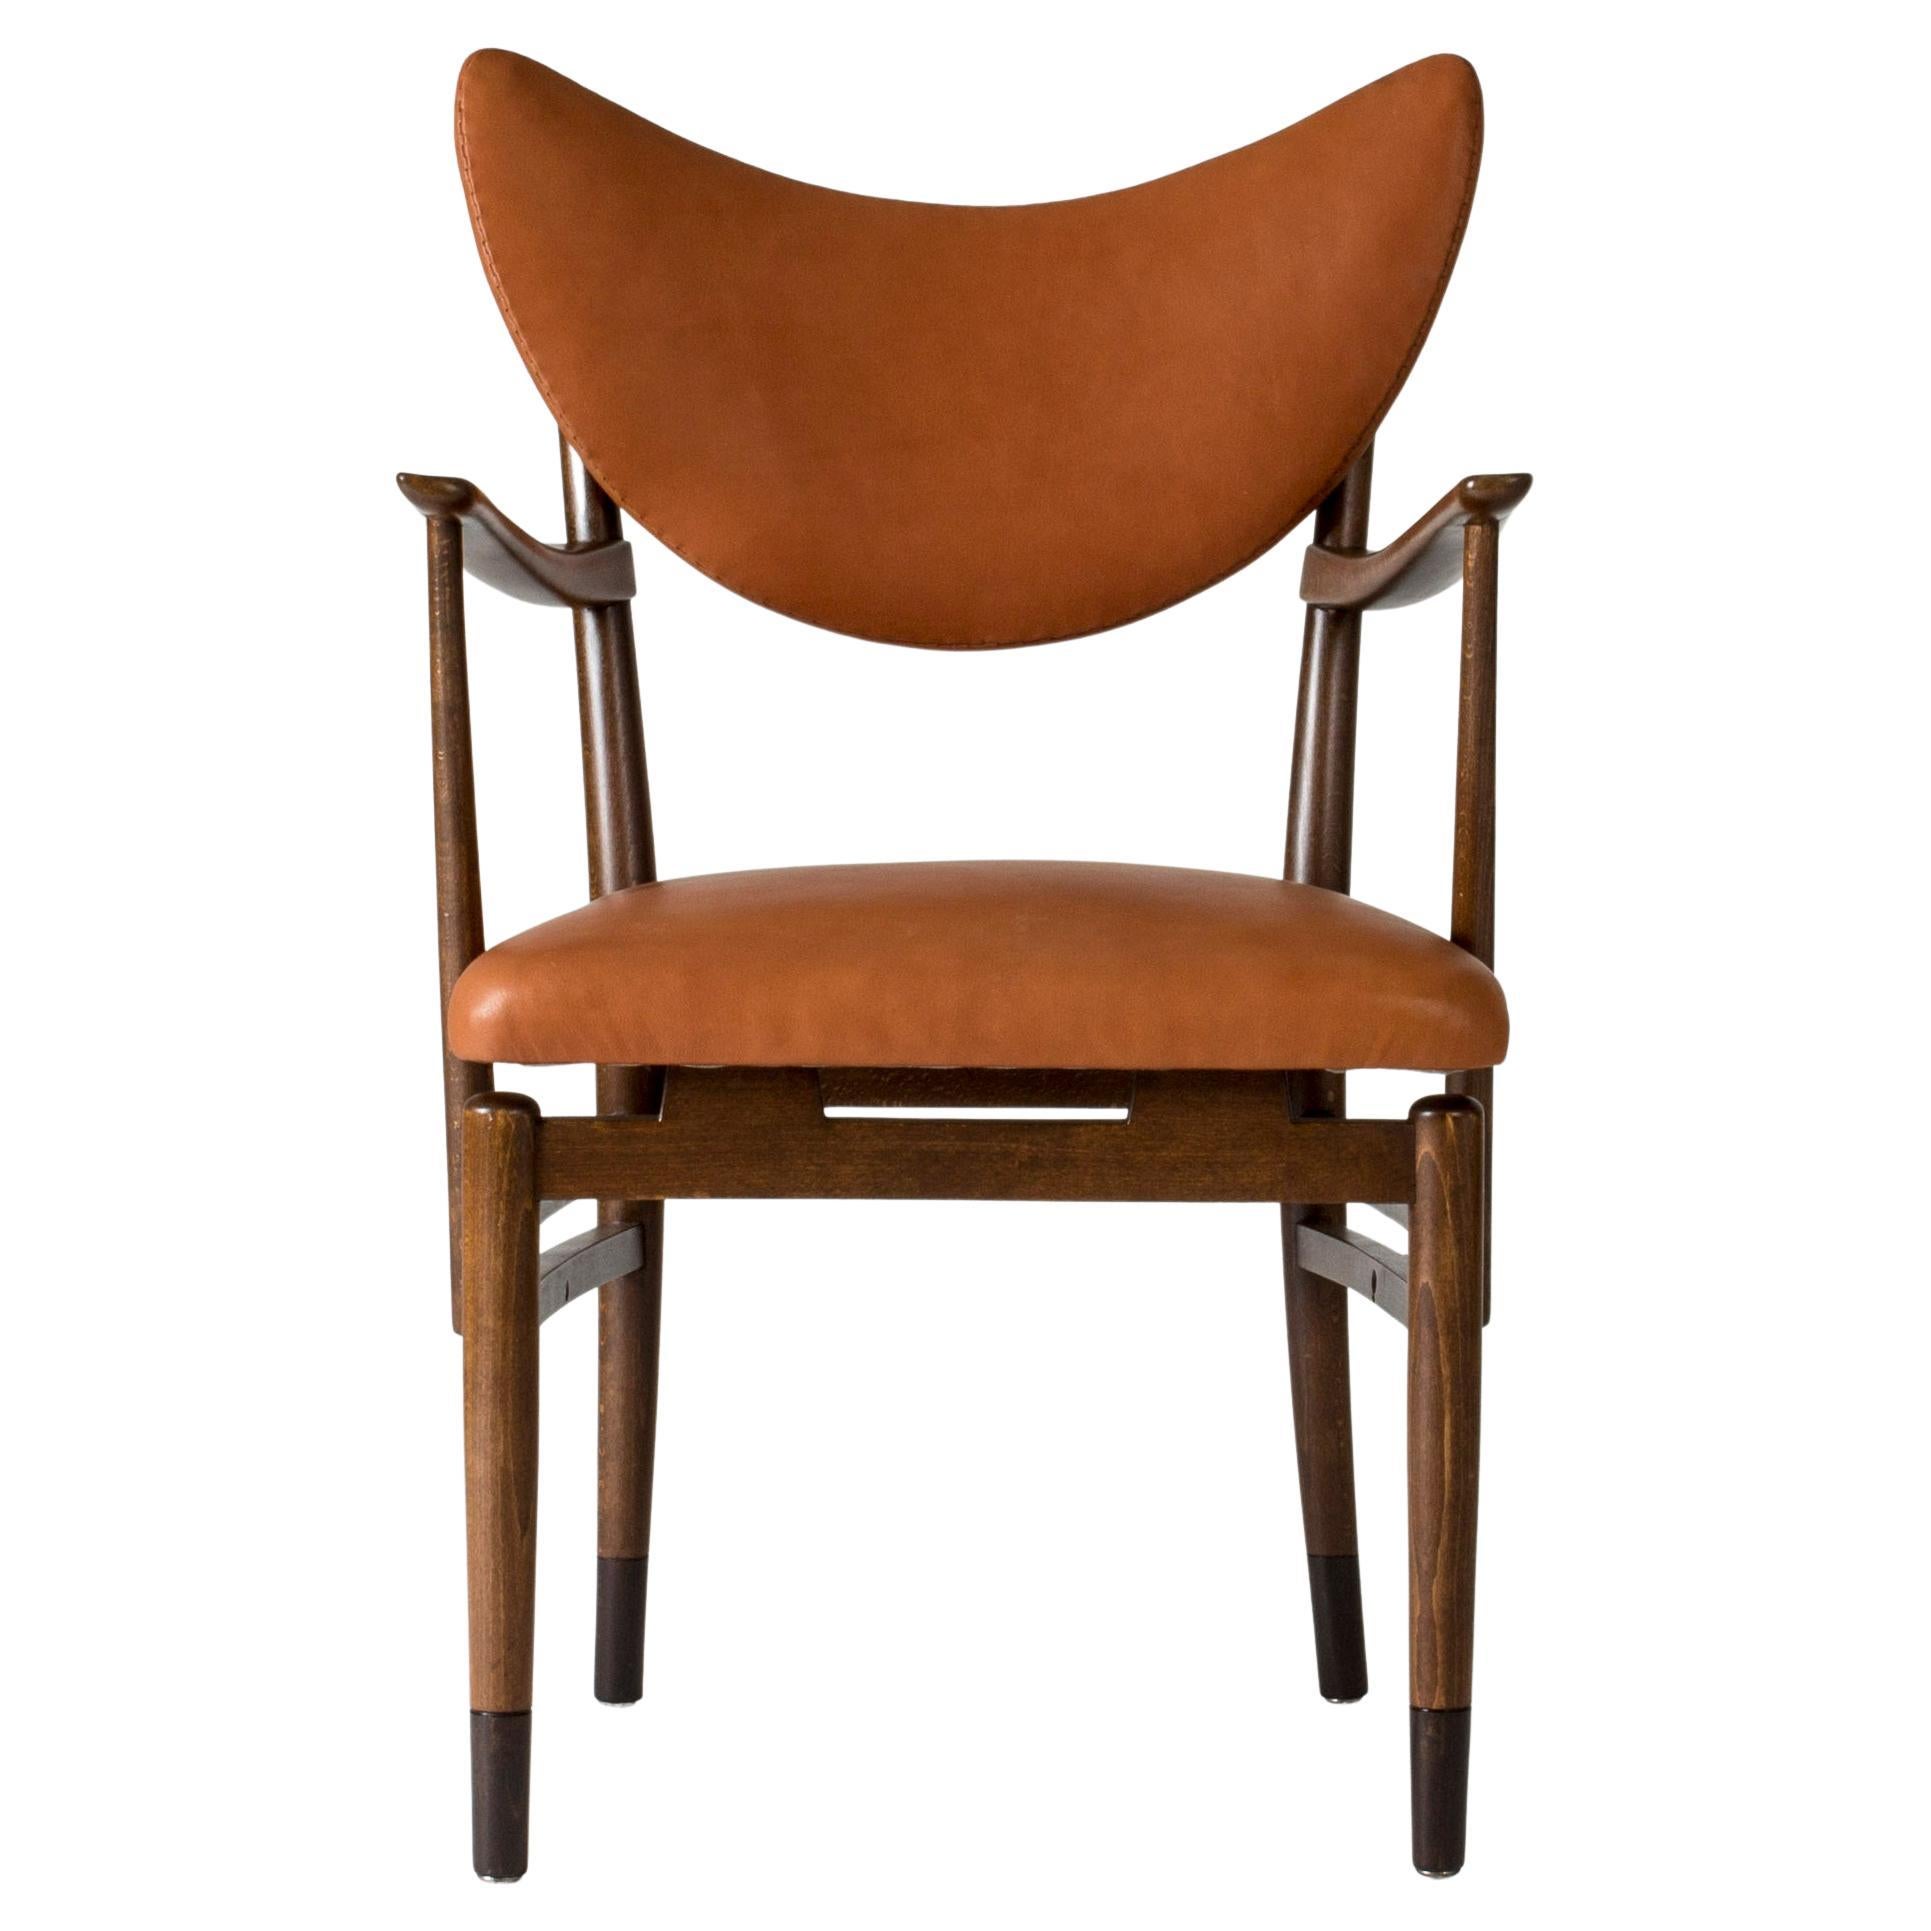 Leather Armchair Attributed to Eva and Nils Koppel, Denmark, 1950s